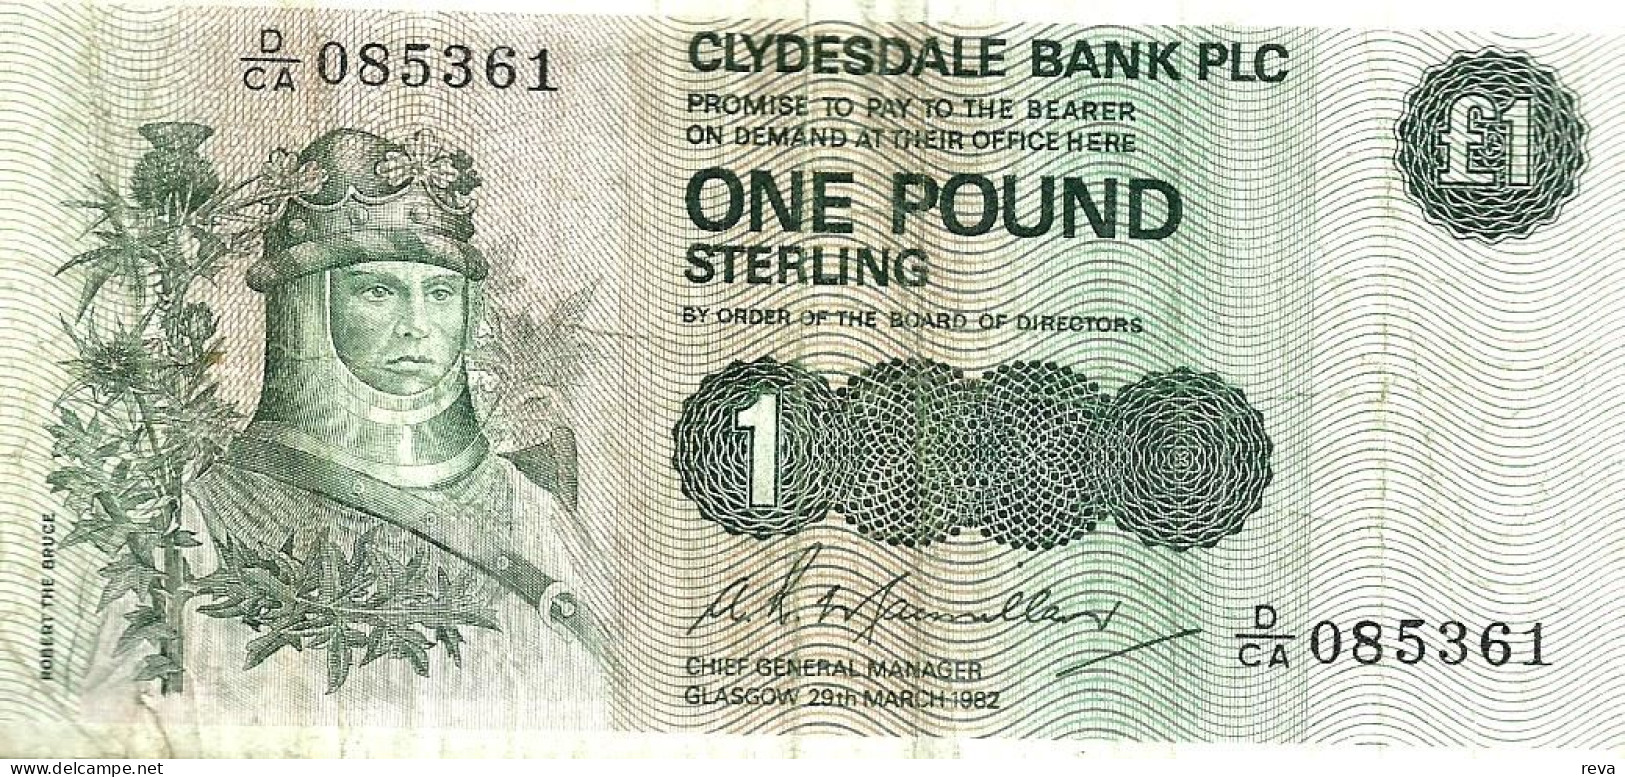 UNITED KINGDOM SCOTLAND 1 POUND GREEN CLYDESDALE BANK MAN FRONT KNIGHT BACK DATED 29-03-1982 P221a READ DESCRIPTION !! - 1 Pond